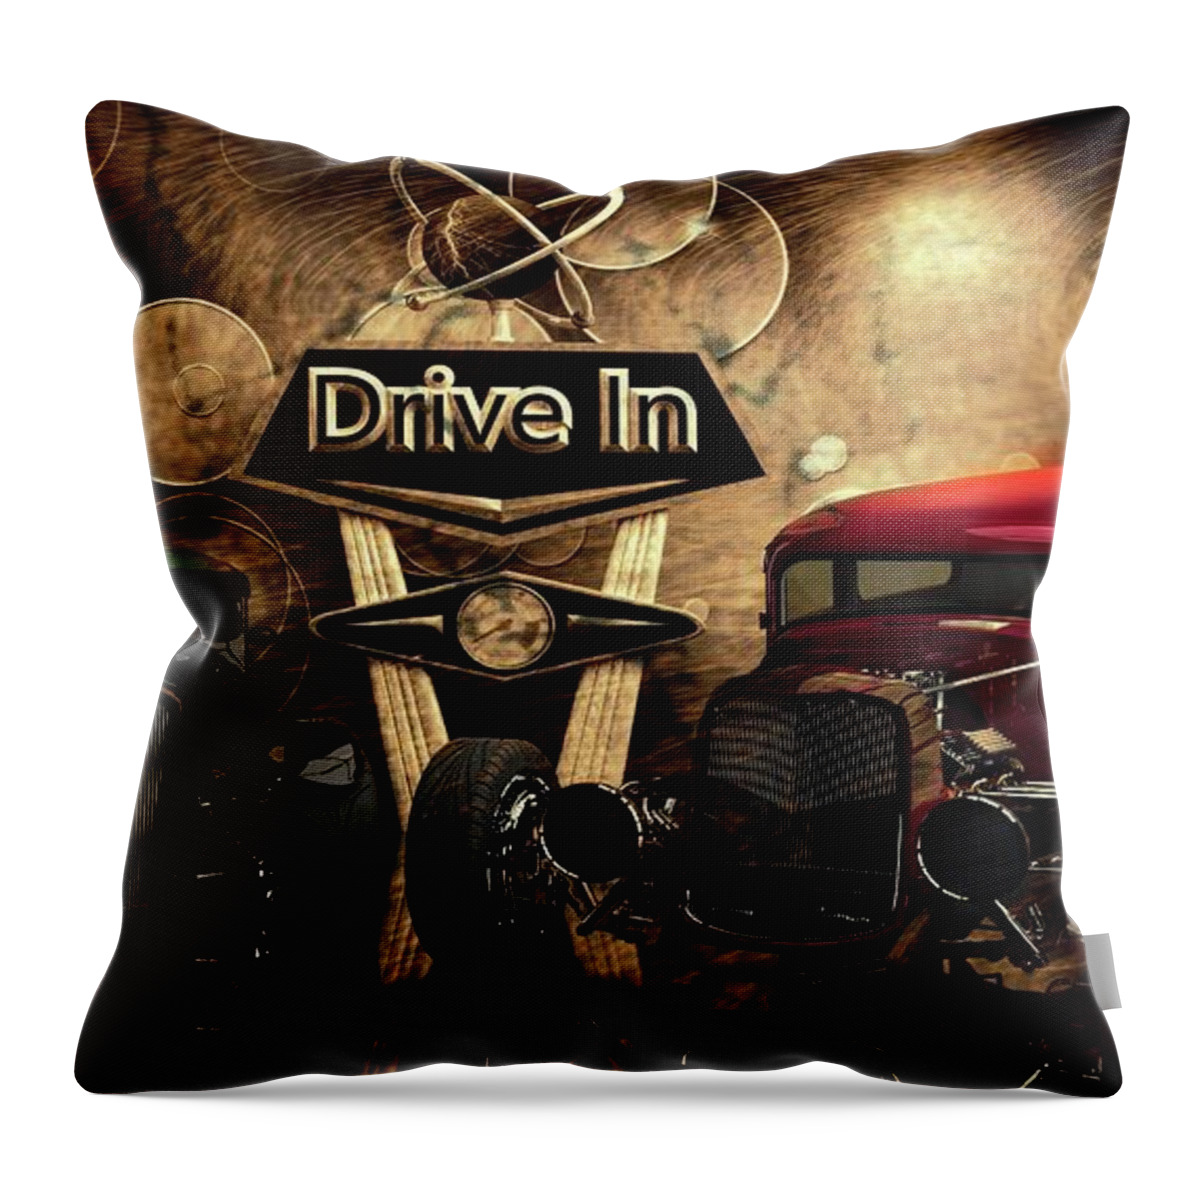 Antique Cars # Collector Cars # Black And White # Ford Hot Rod # Chevy # Drive In # 3d Render # Classic Hot Rod # Custom Hot Rods # Chopped Top # Old School Throw Pillow featuring the photograph Drive In by Louis Ferreira